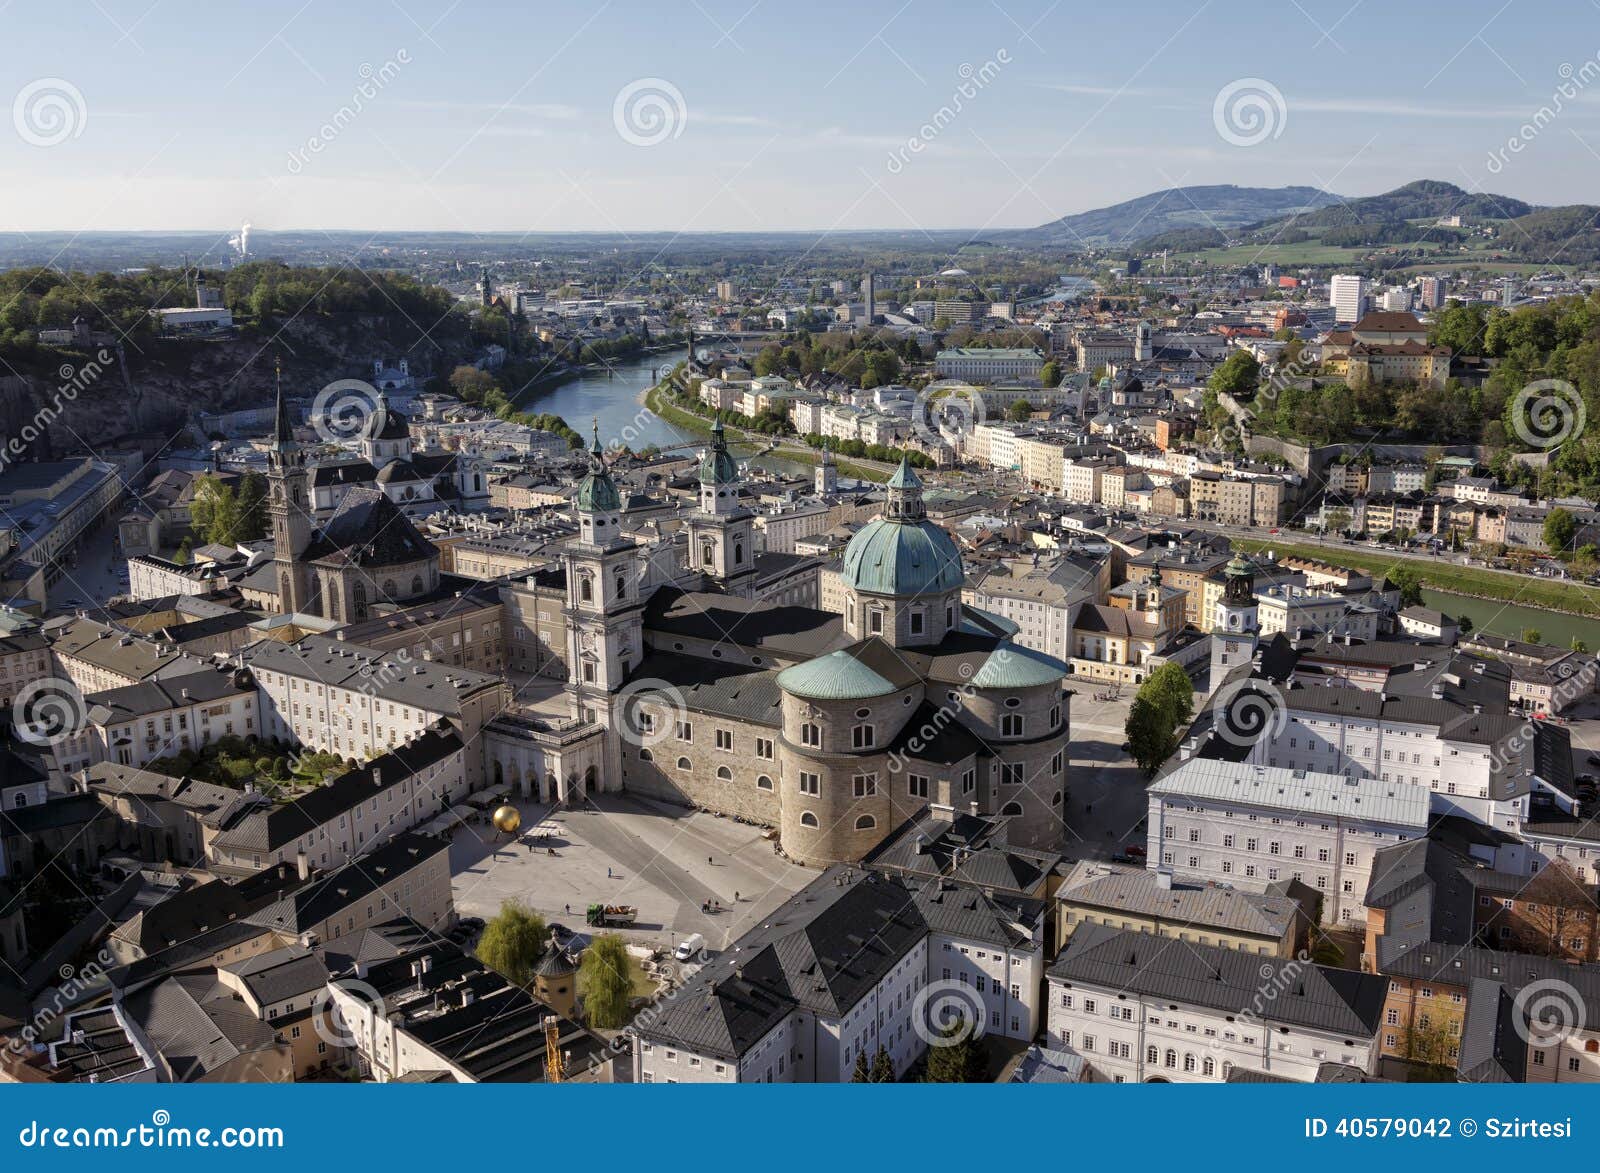 The downtown of Salzburg stock photo. Image of city, dome - 40579042